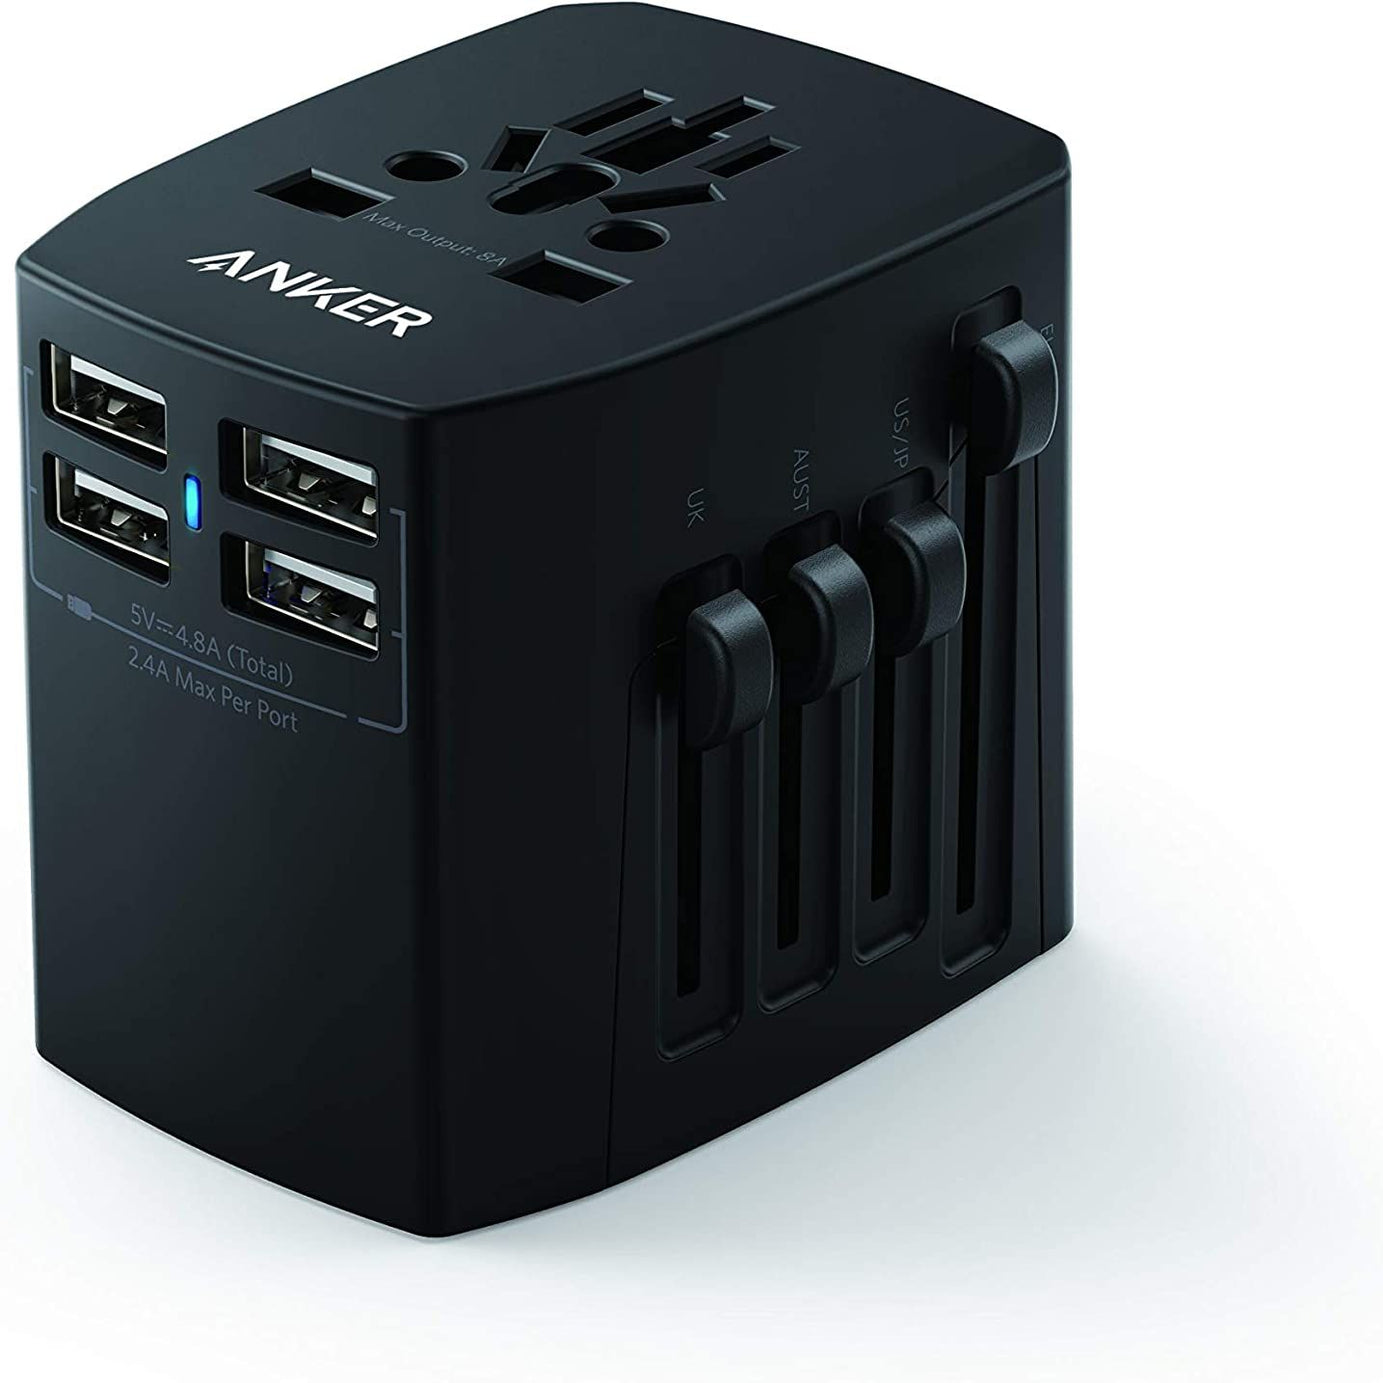 Anker Universal Travel Adapter With 4 Usb Ports, Interchangeable Travel Charger A2730H11